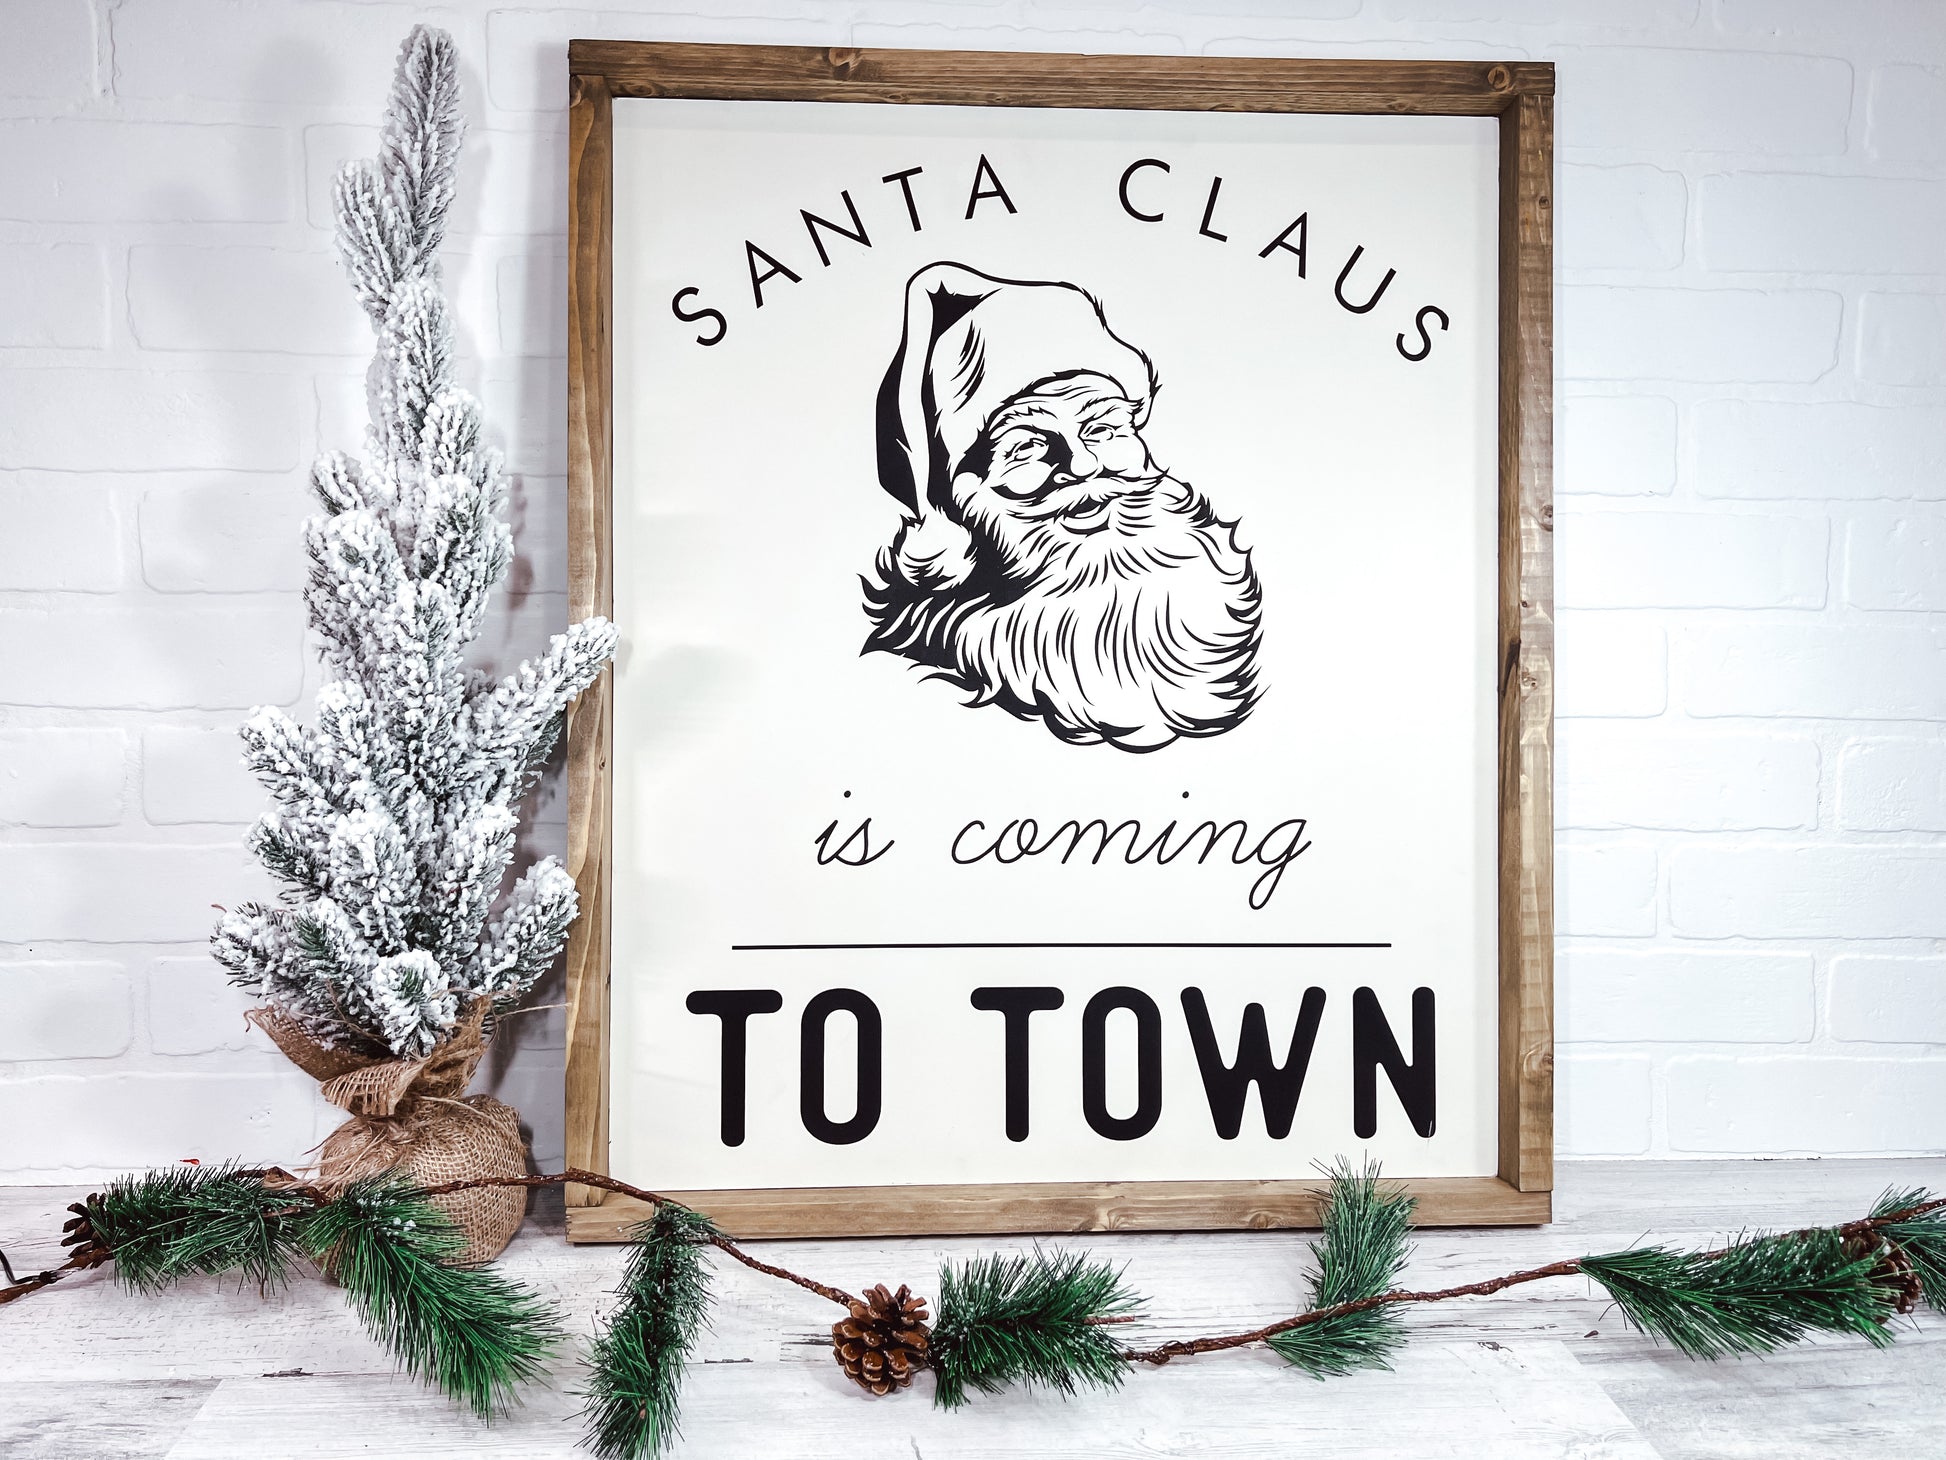 Santa Claus is Coming to Town - B-Cozy Home Decor